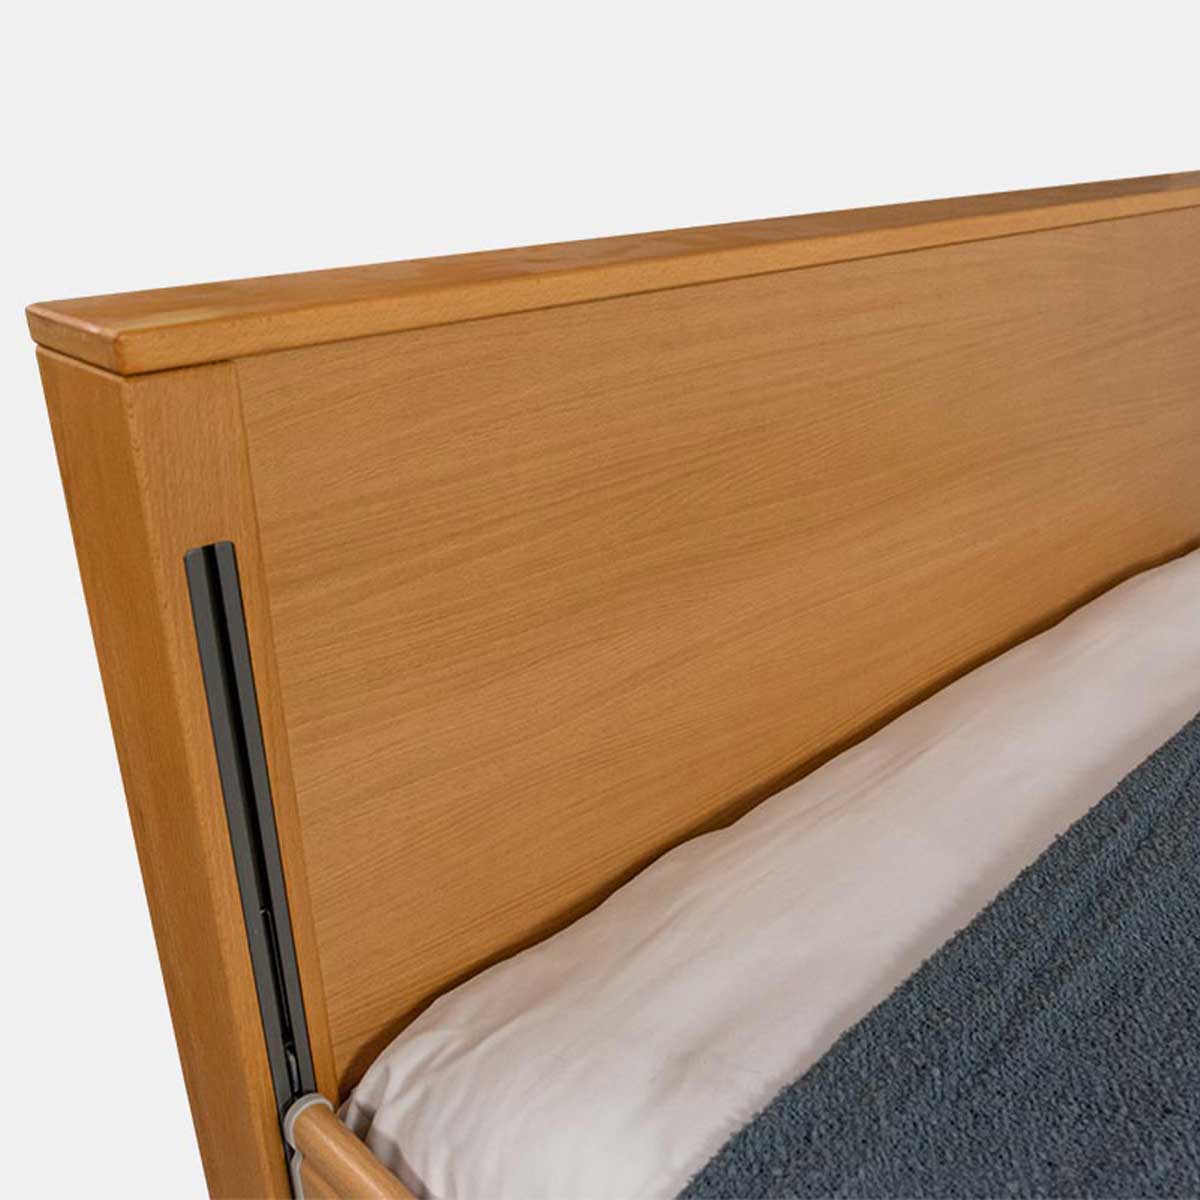 Ecofit Xtra care bed, including upright